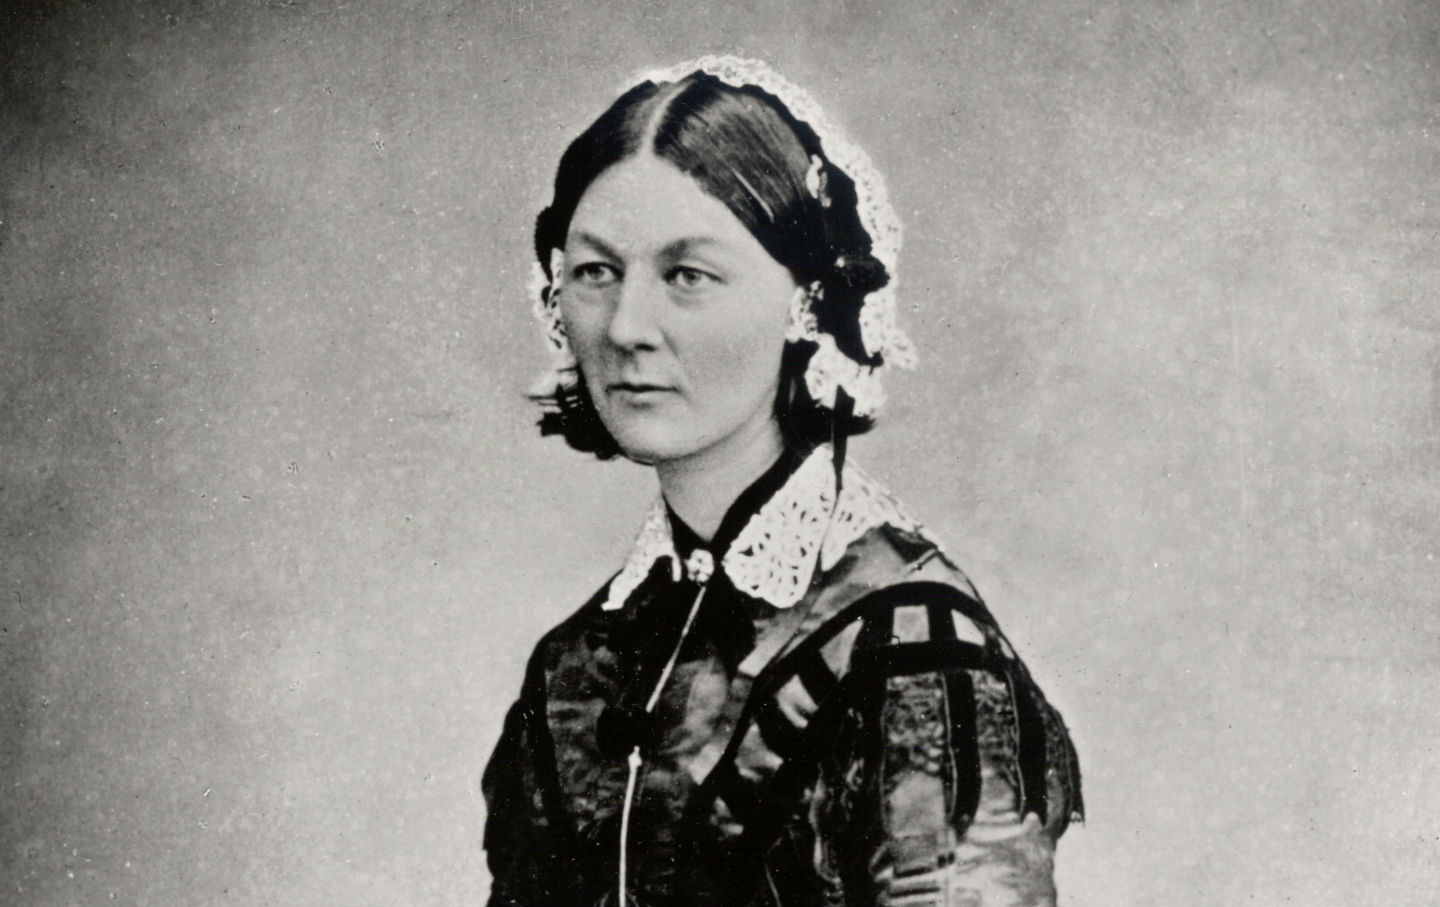 May 12, 1820: Florence Nightingale, Founder of Nursing, Is Born